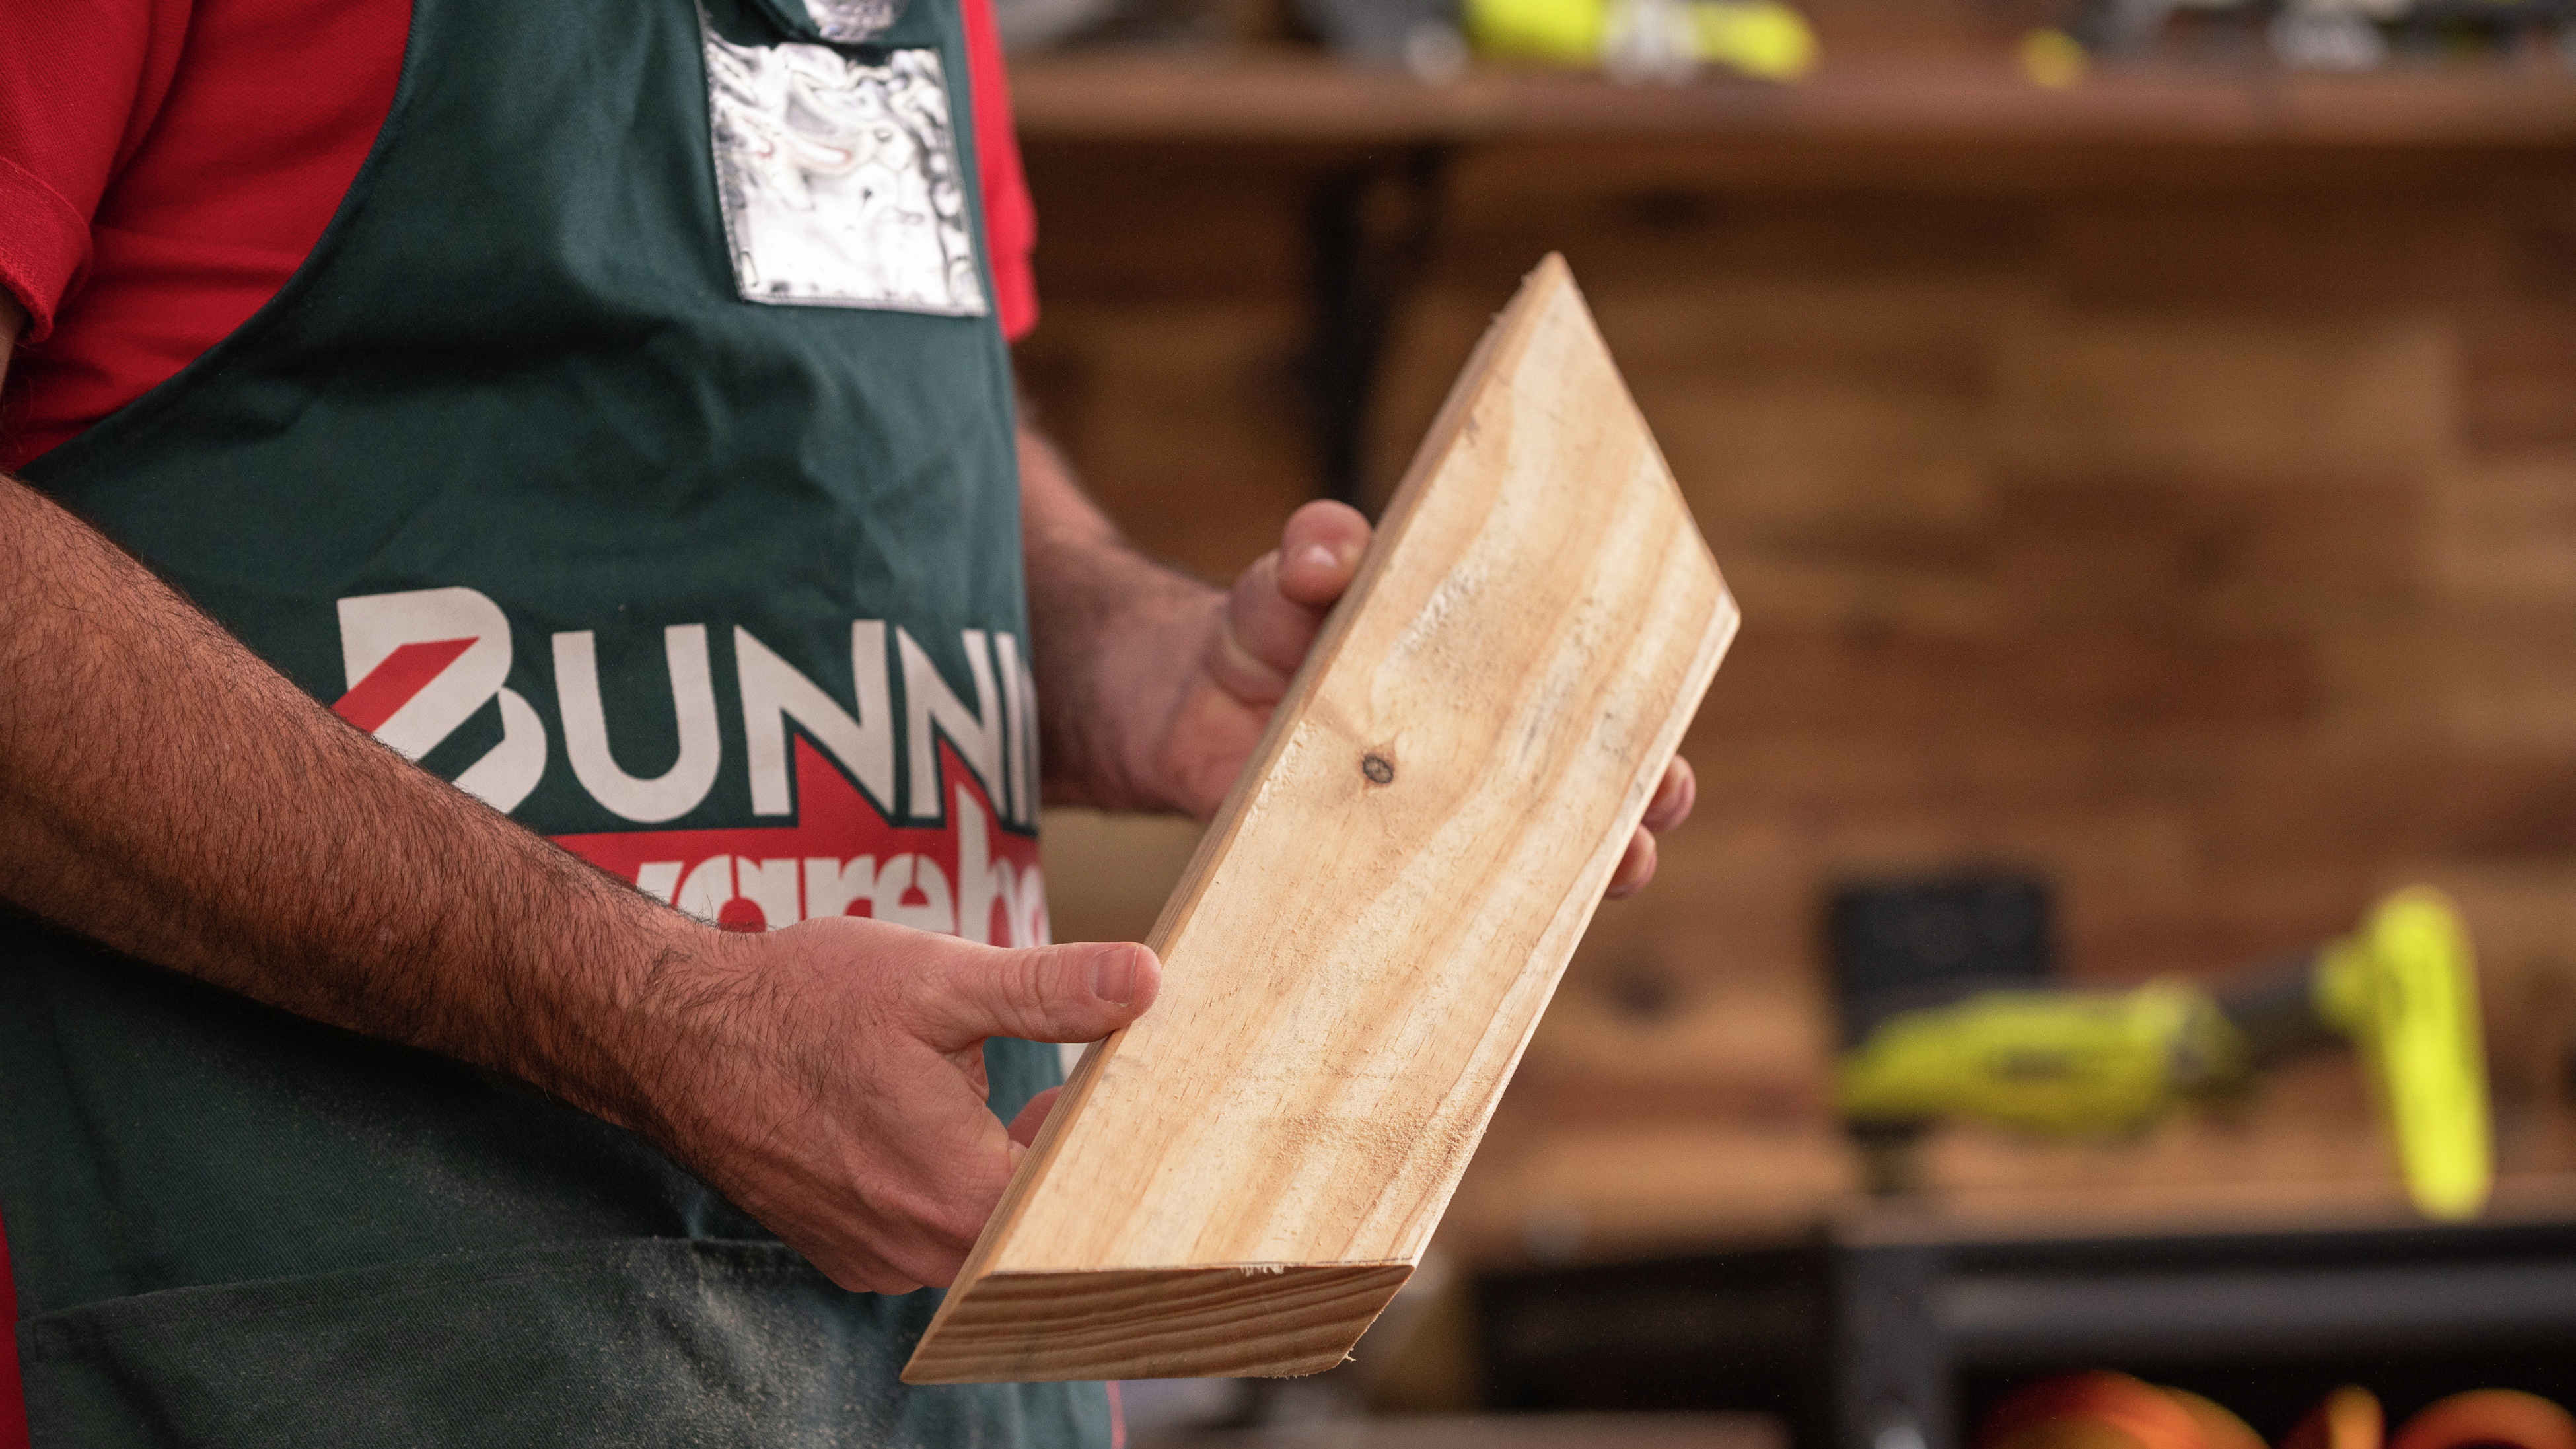 How To Make A D.I.Y. Resin Picnic Table - Bunnings Australia